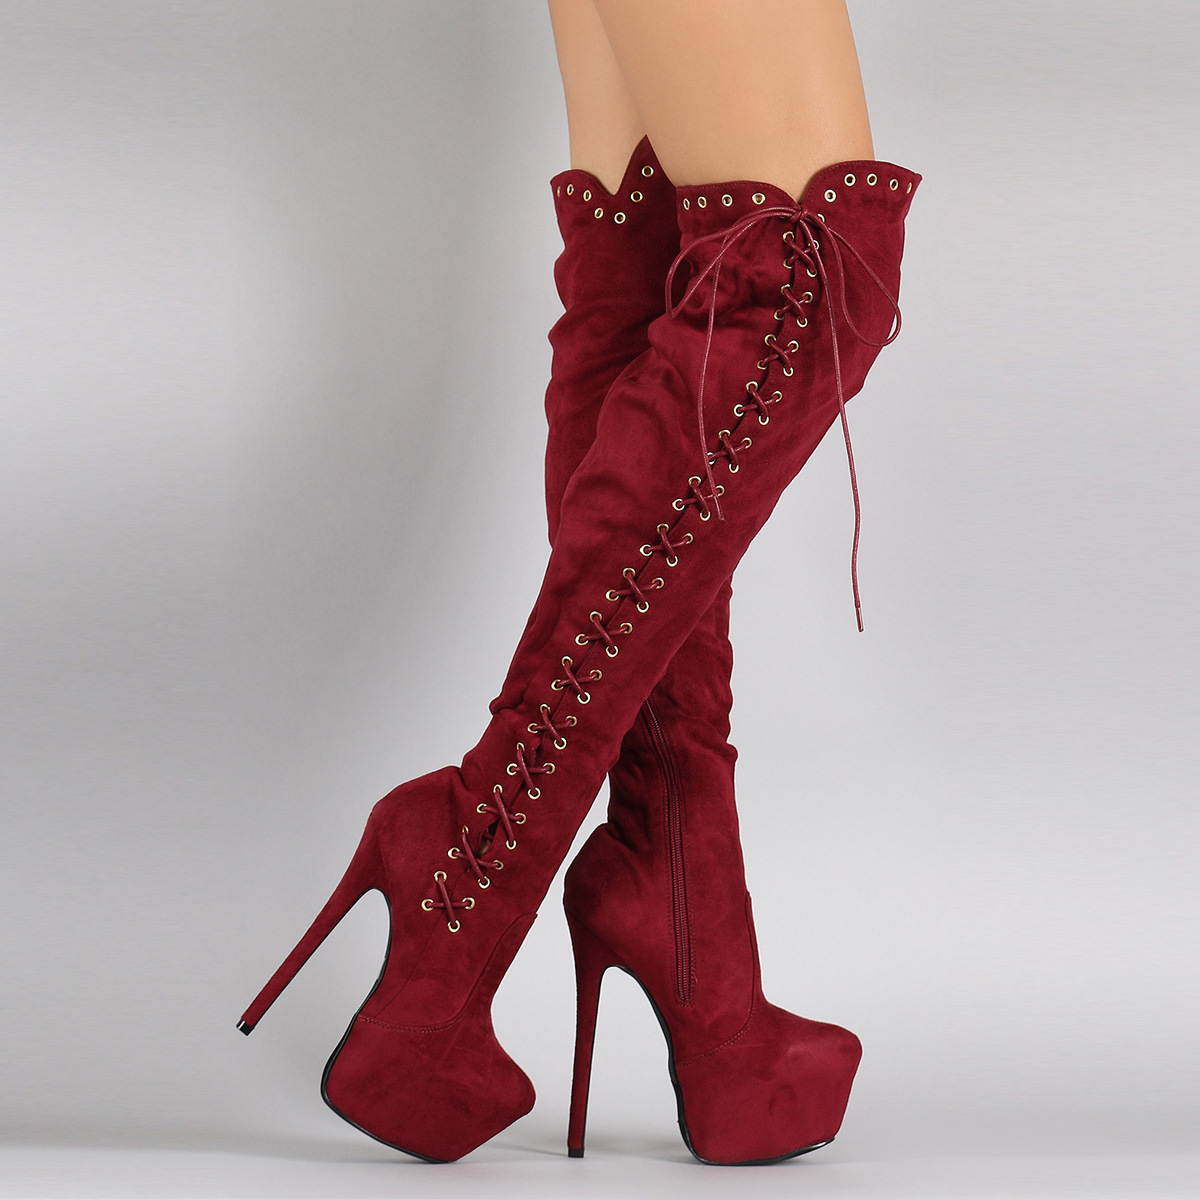 Lace Up Platform Round Toe Super High Stiletto Heel Over The Knee Boots